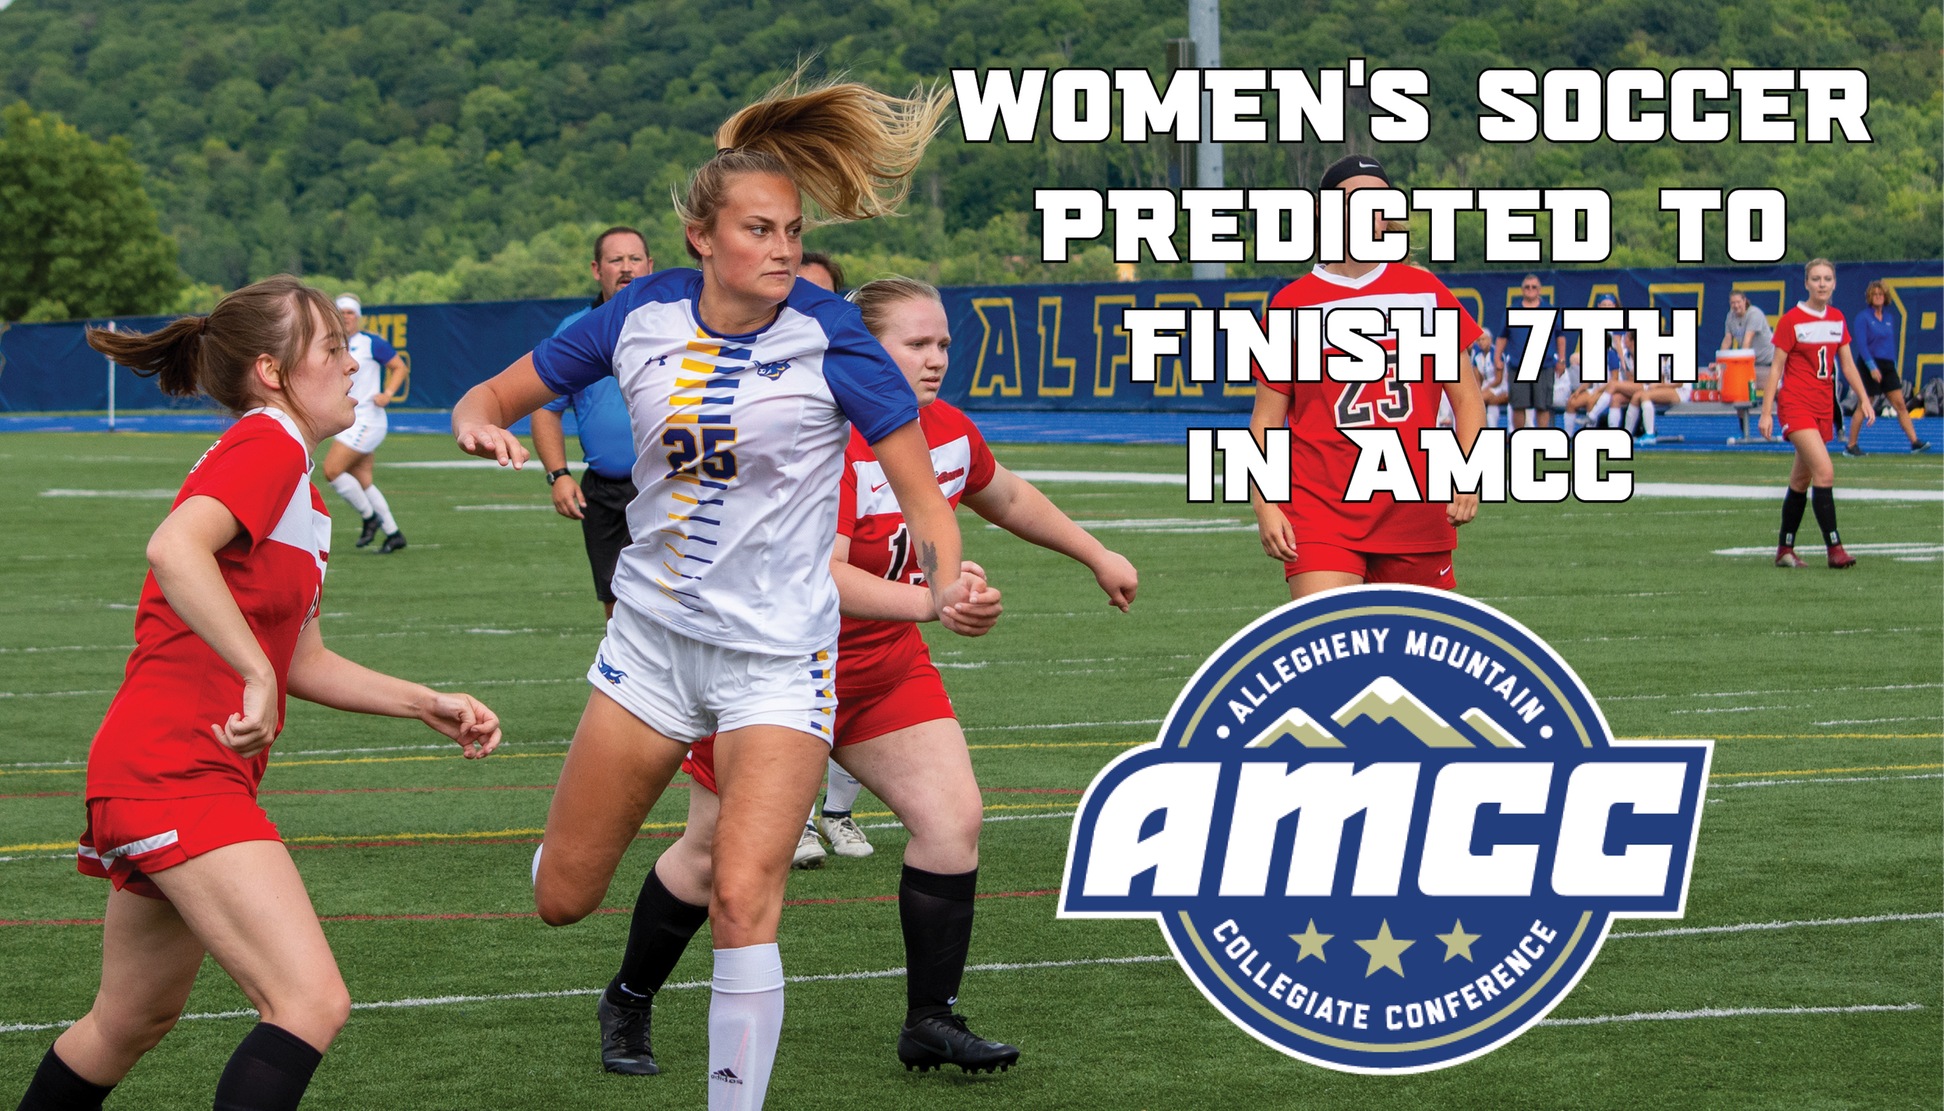 Alfred State Women's Soccer team predicted 7th in the AMCC - Maggie Meyer heads the ball surrounded by defenders in a recent scrimmage.